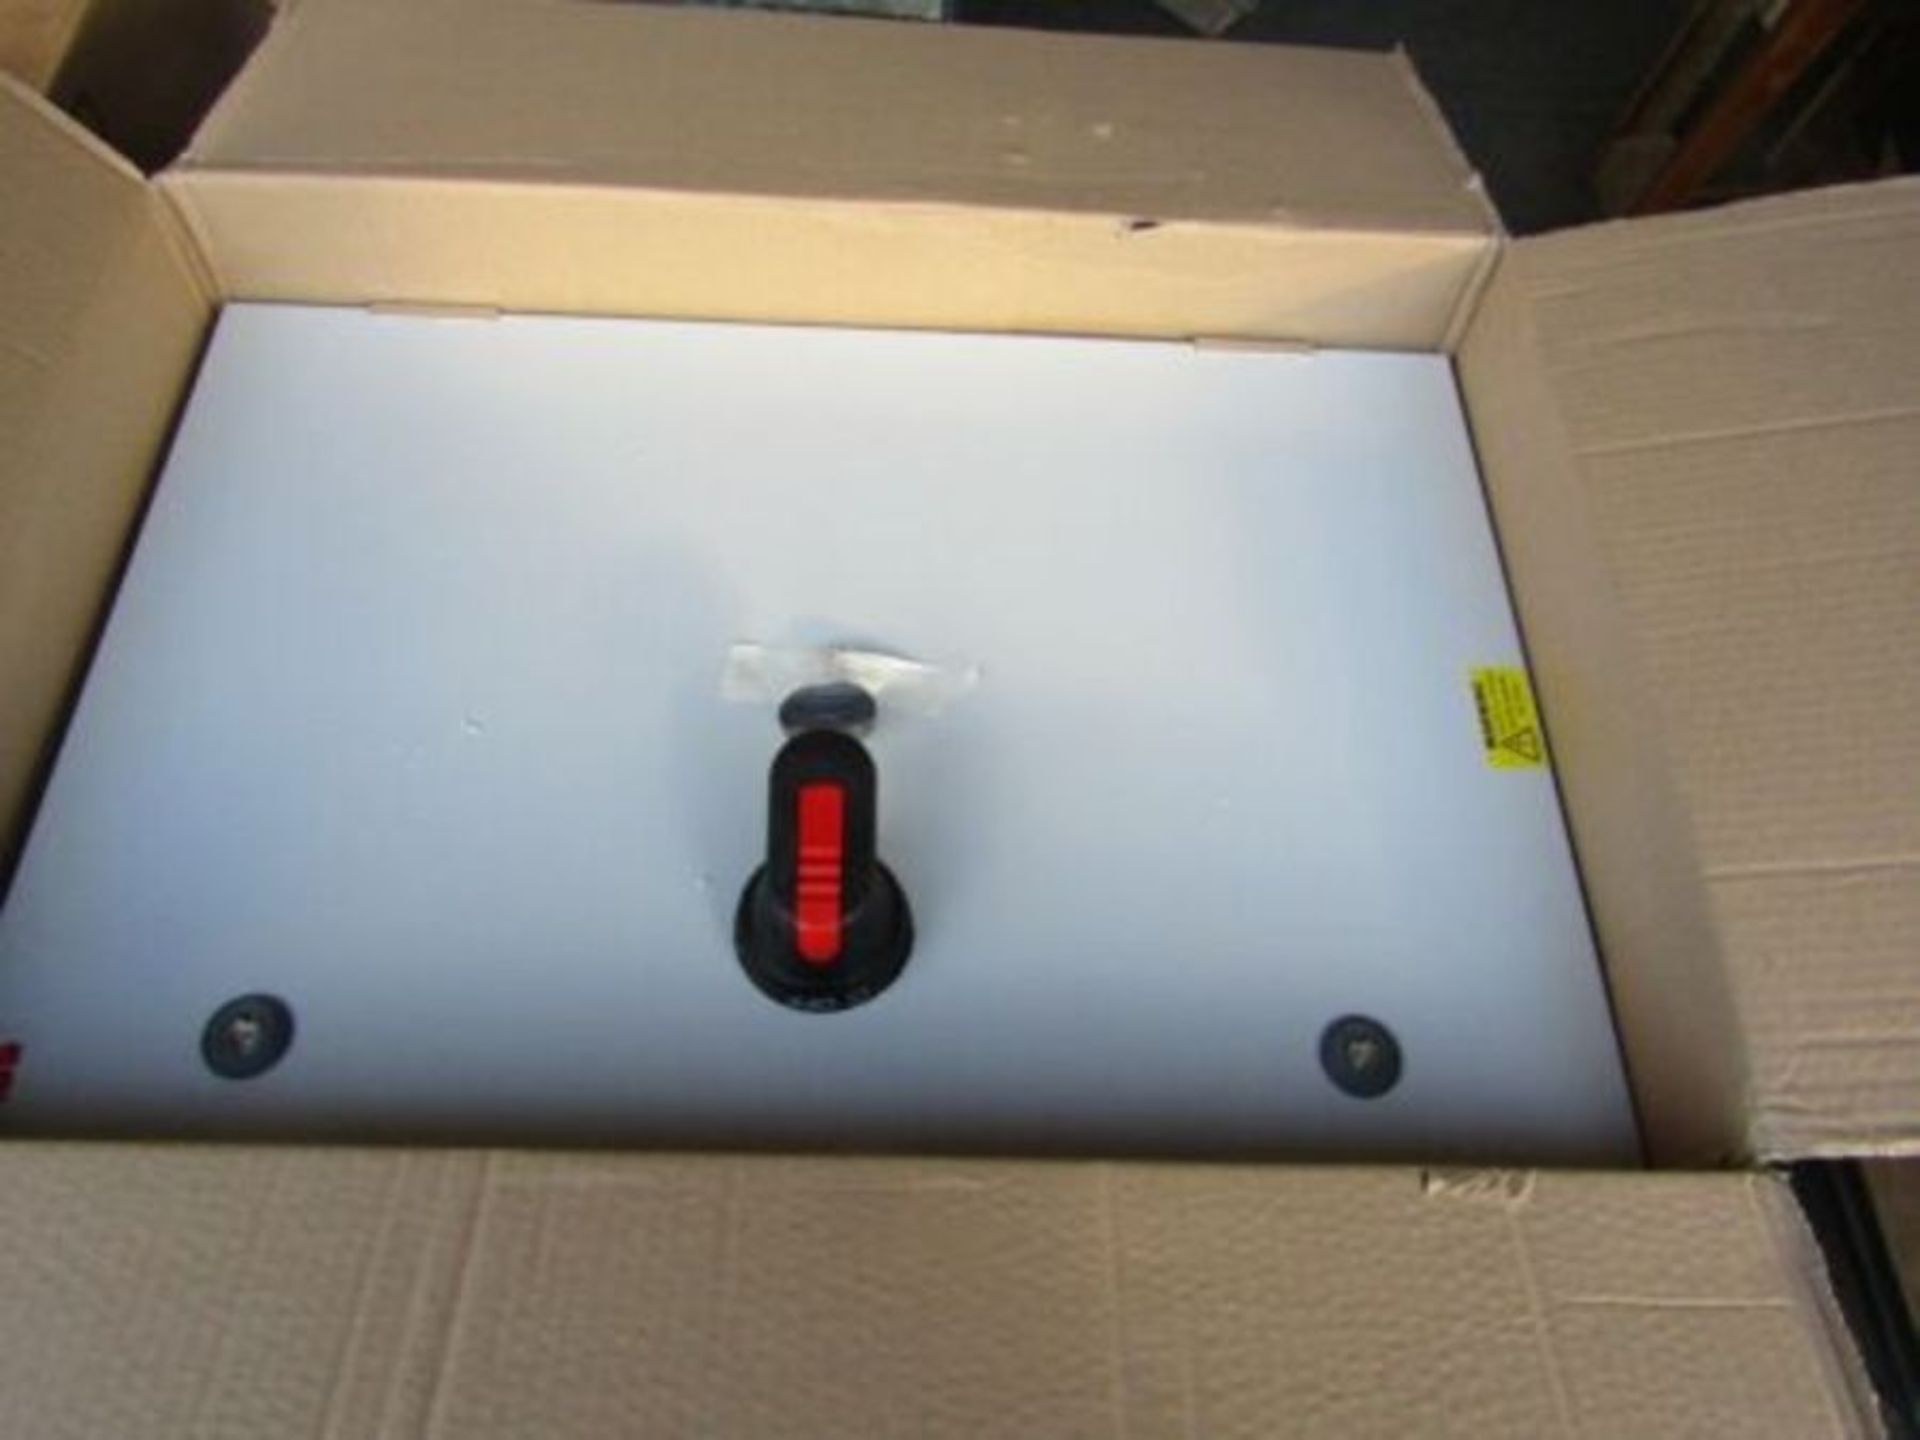 Pallet of Eaton Disconnector Switches + ABB +GCE - 9 lines ebay value of £2.8k - Blkfr